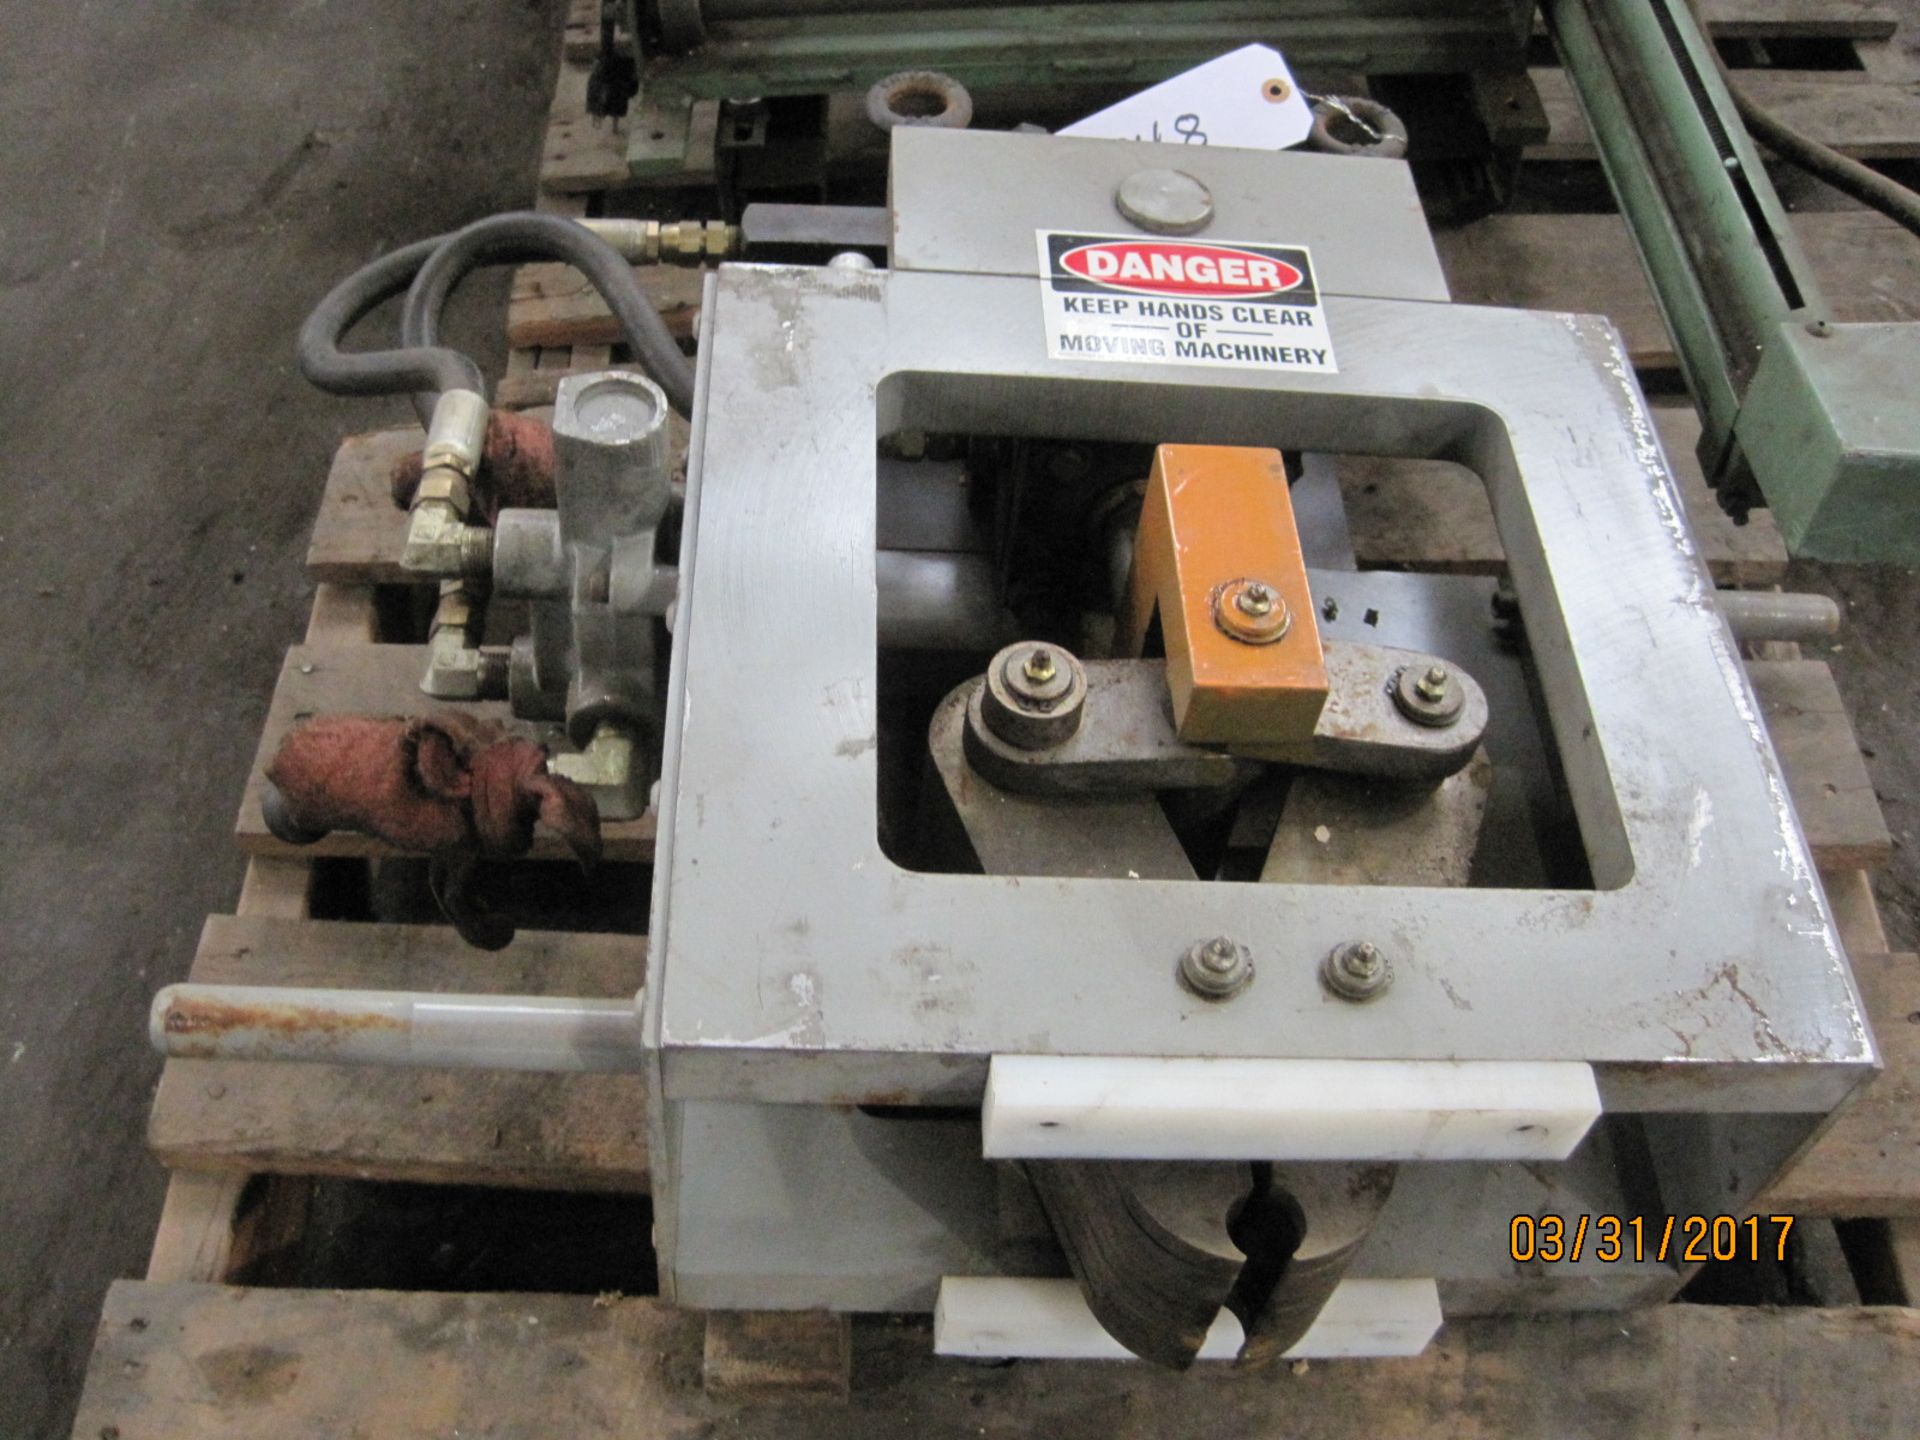 Hydraulic crimper with manual shuttle valve